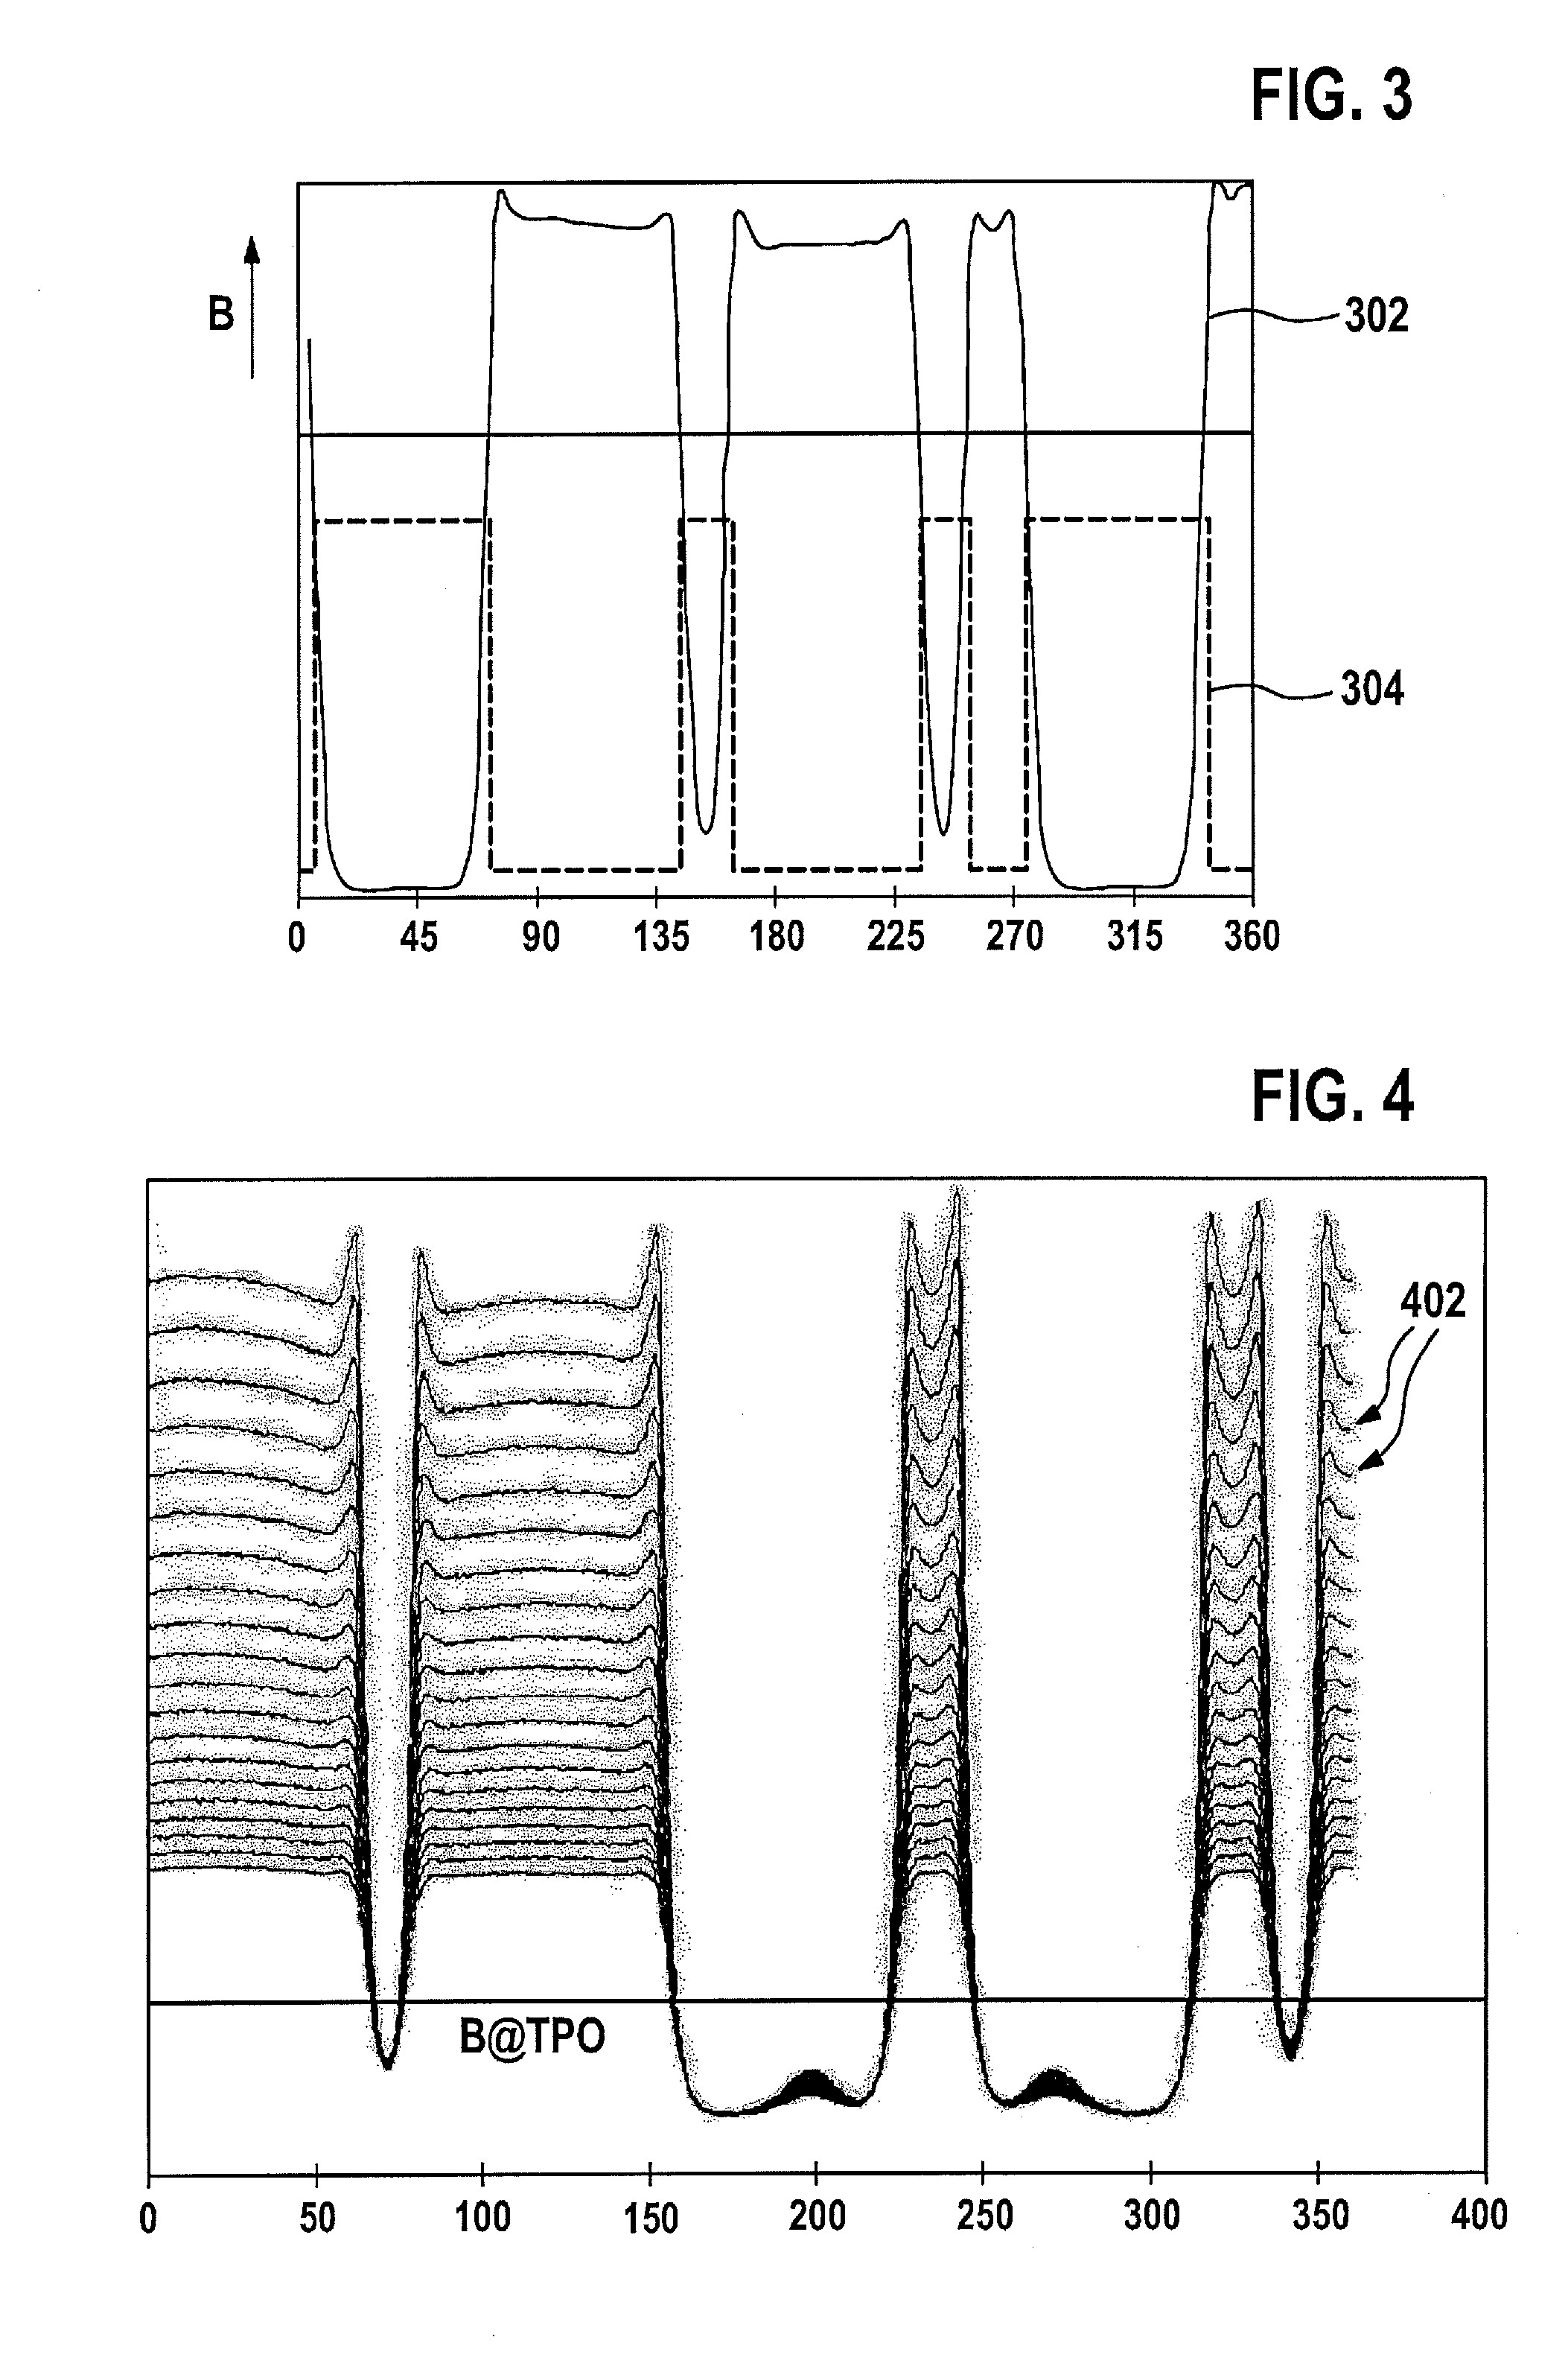 Method and device for determining a recognition threshold